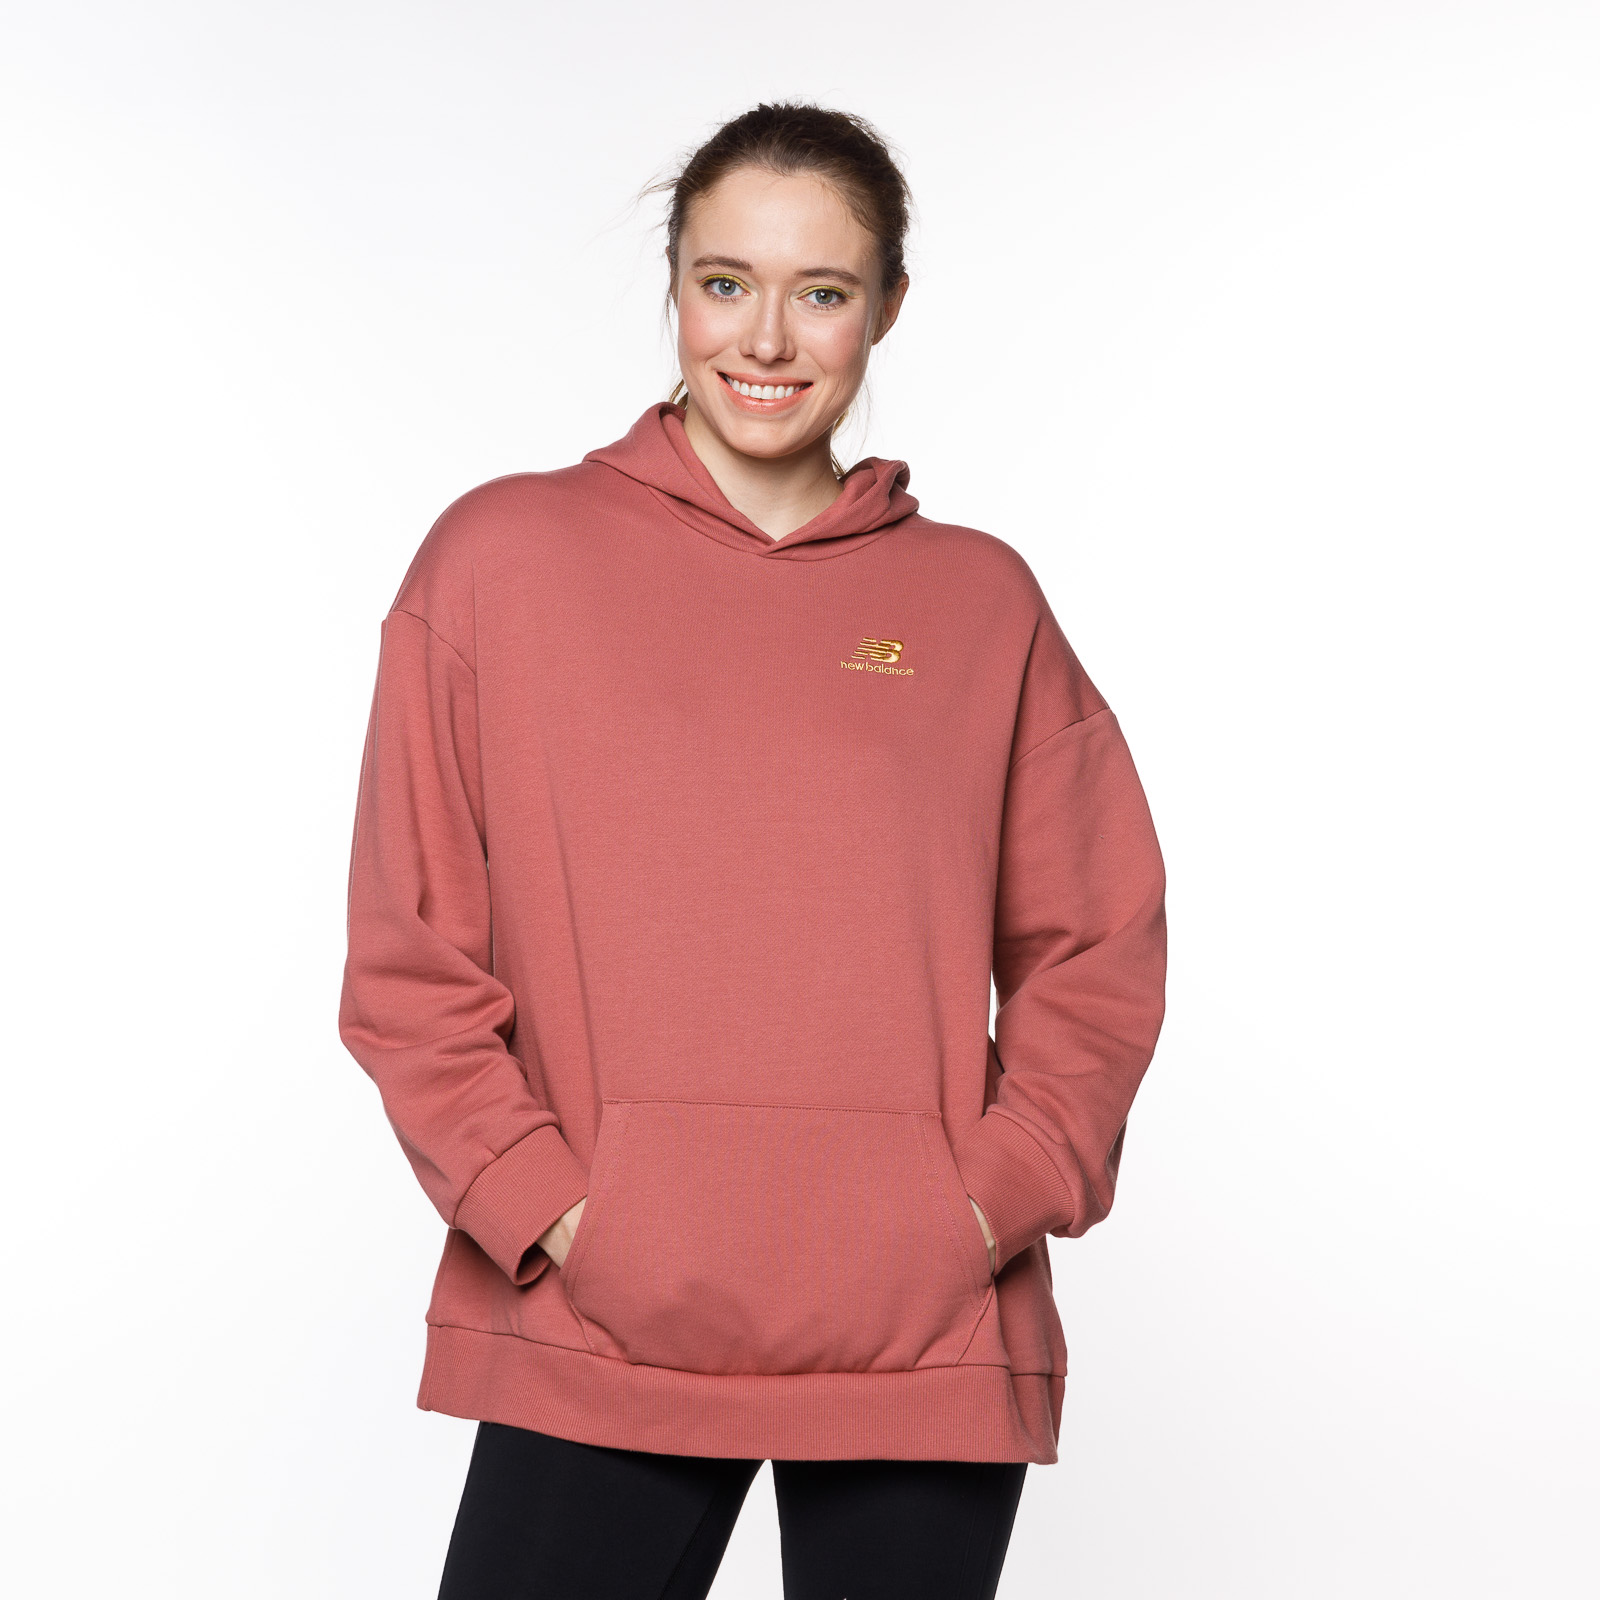 New Balance WOMEN'S Athletics Higher Learning Hoodie PINK